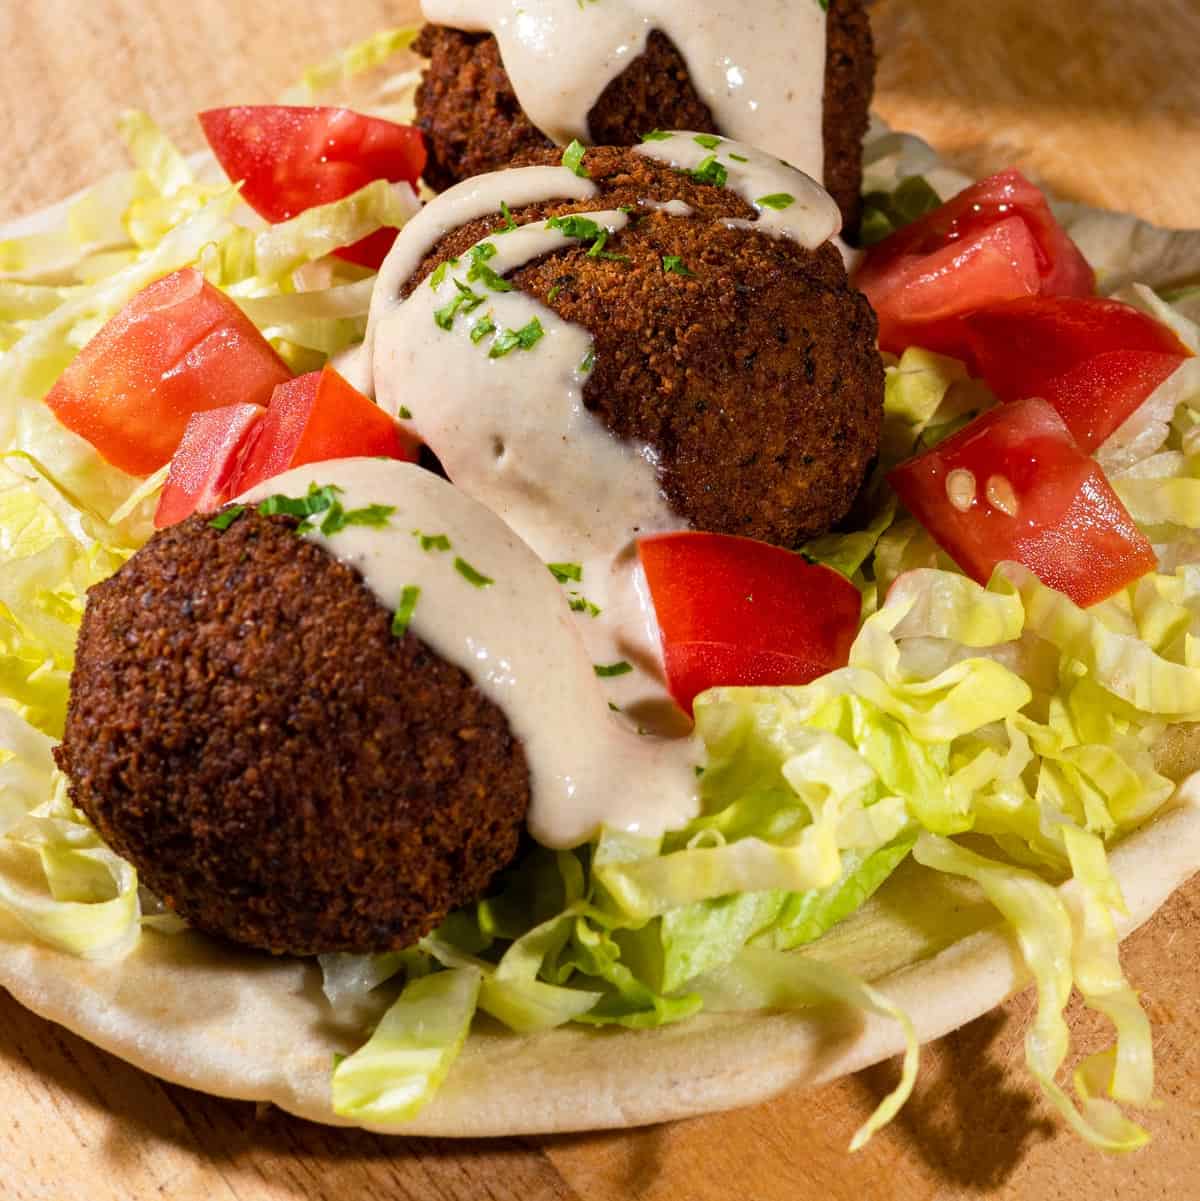 Vegan Falafel on a pita with shredded lettuce and diced tomatoes topped with tahini sauce.